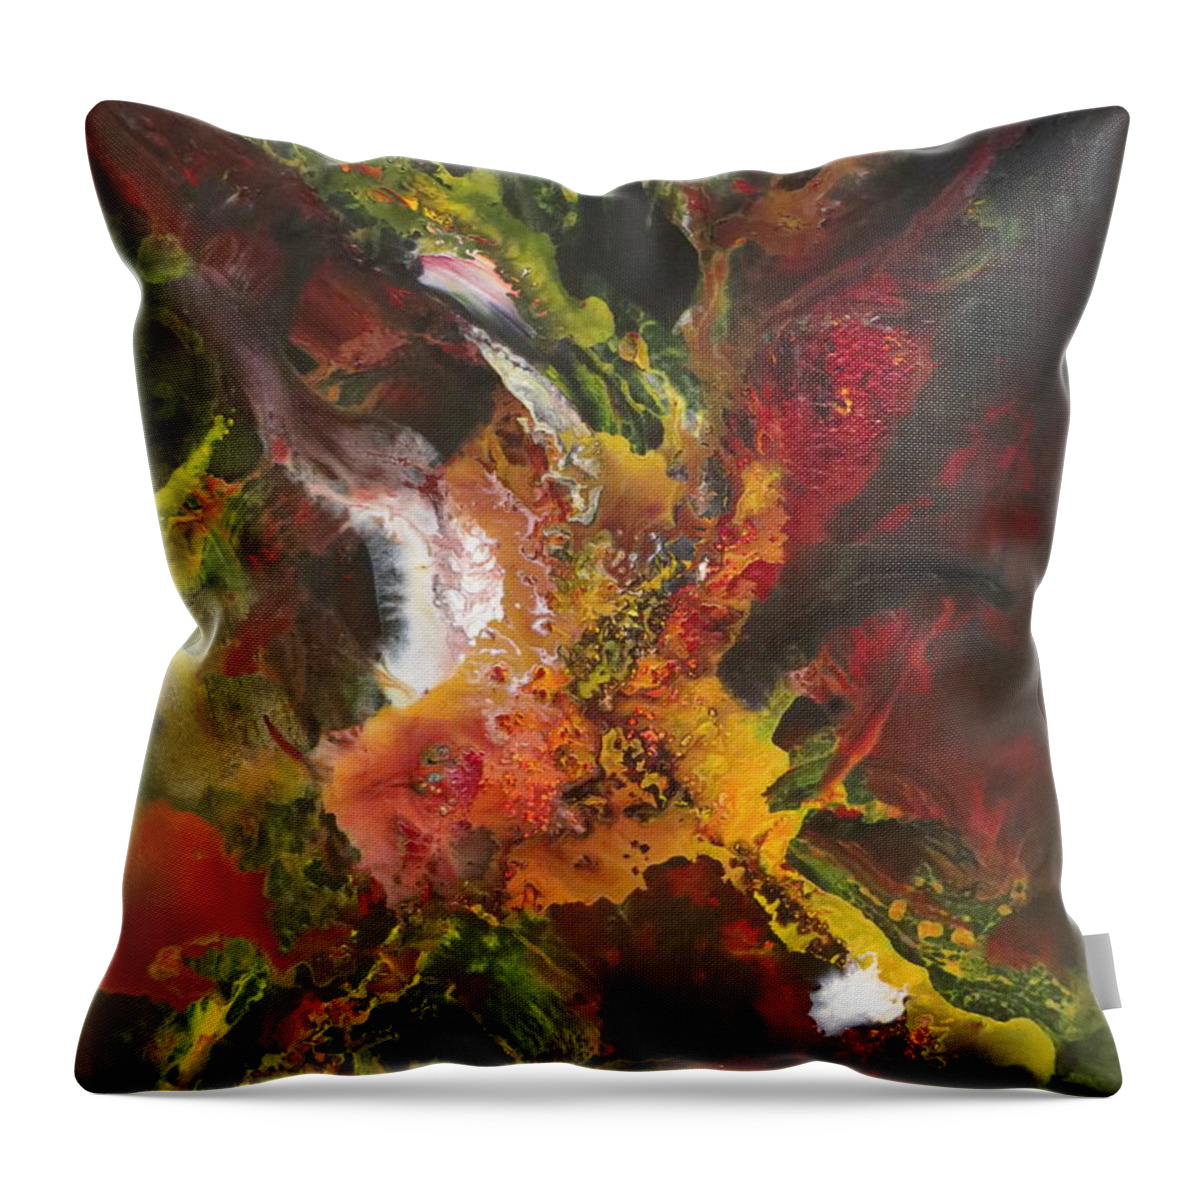 Abstract Throw Pillow featuring the painting Orchid by Soraya Silvestri